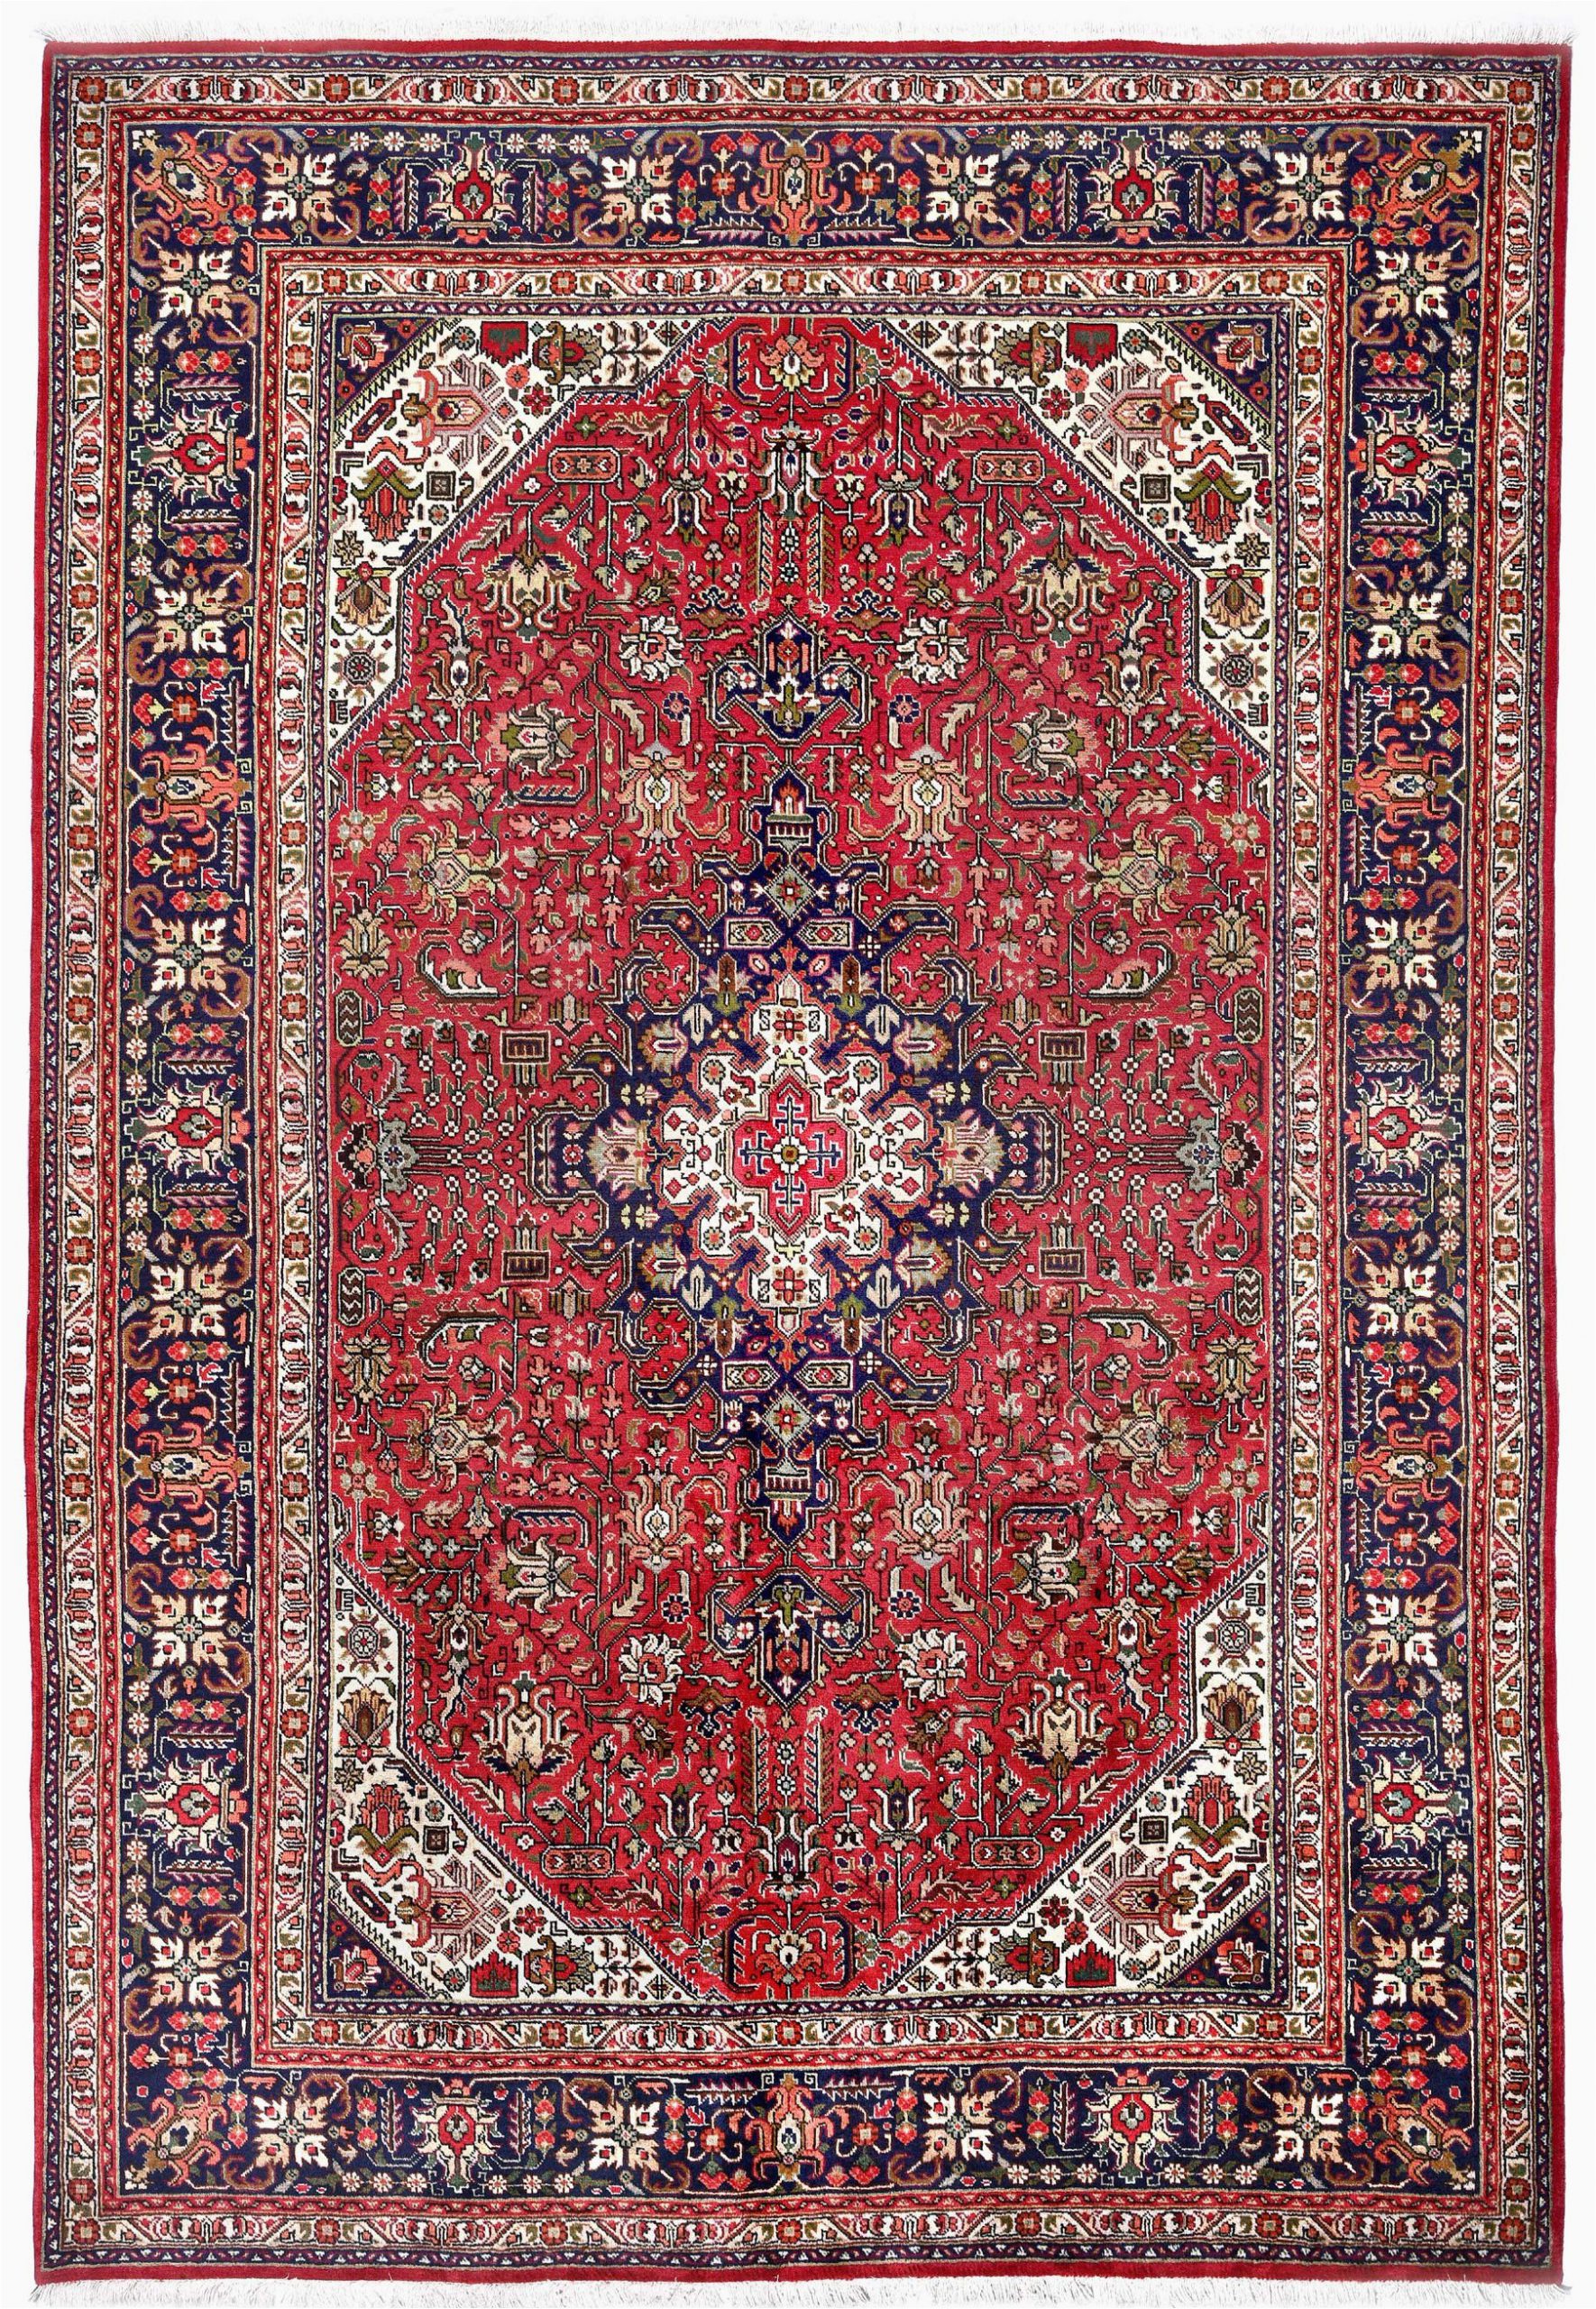 Brown and Blue Rugs for Sale Red Tabriz Rug Persian Carpet for Sale 2x3m Dr423